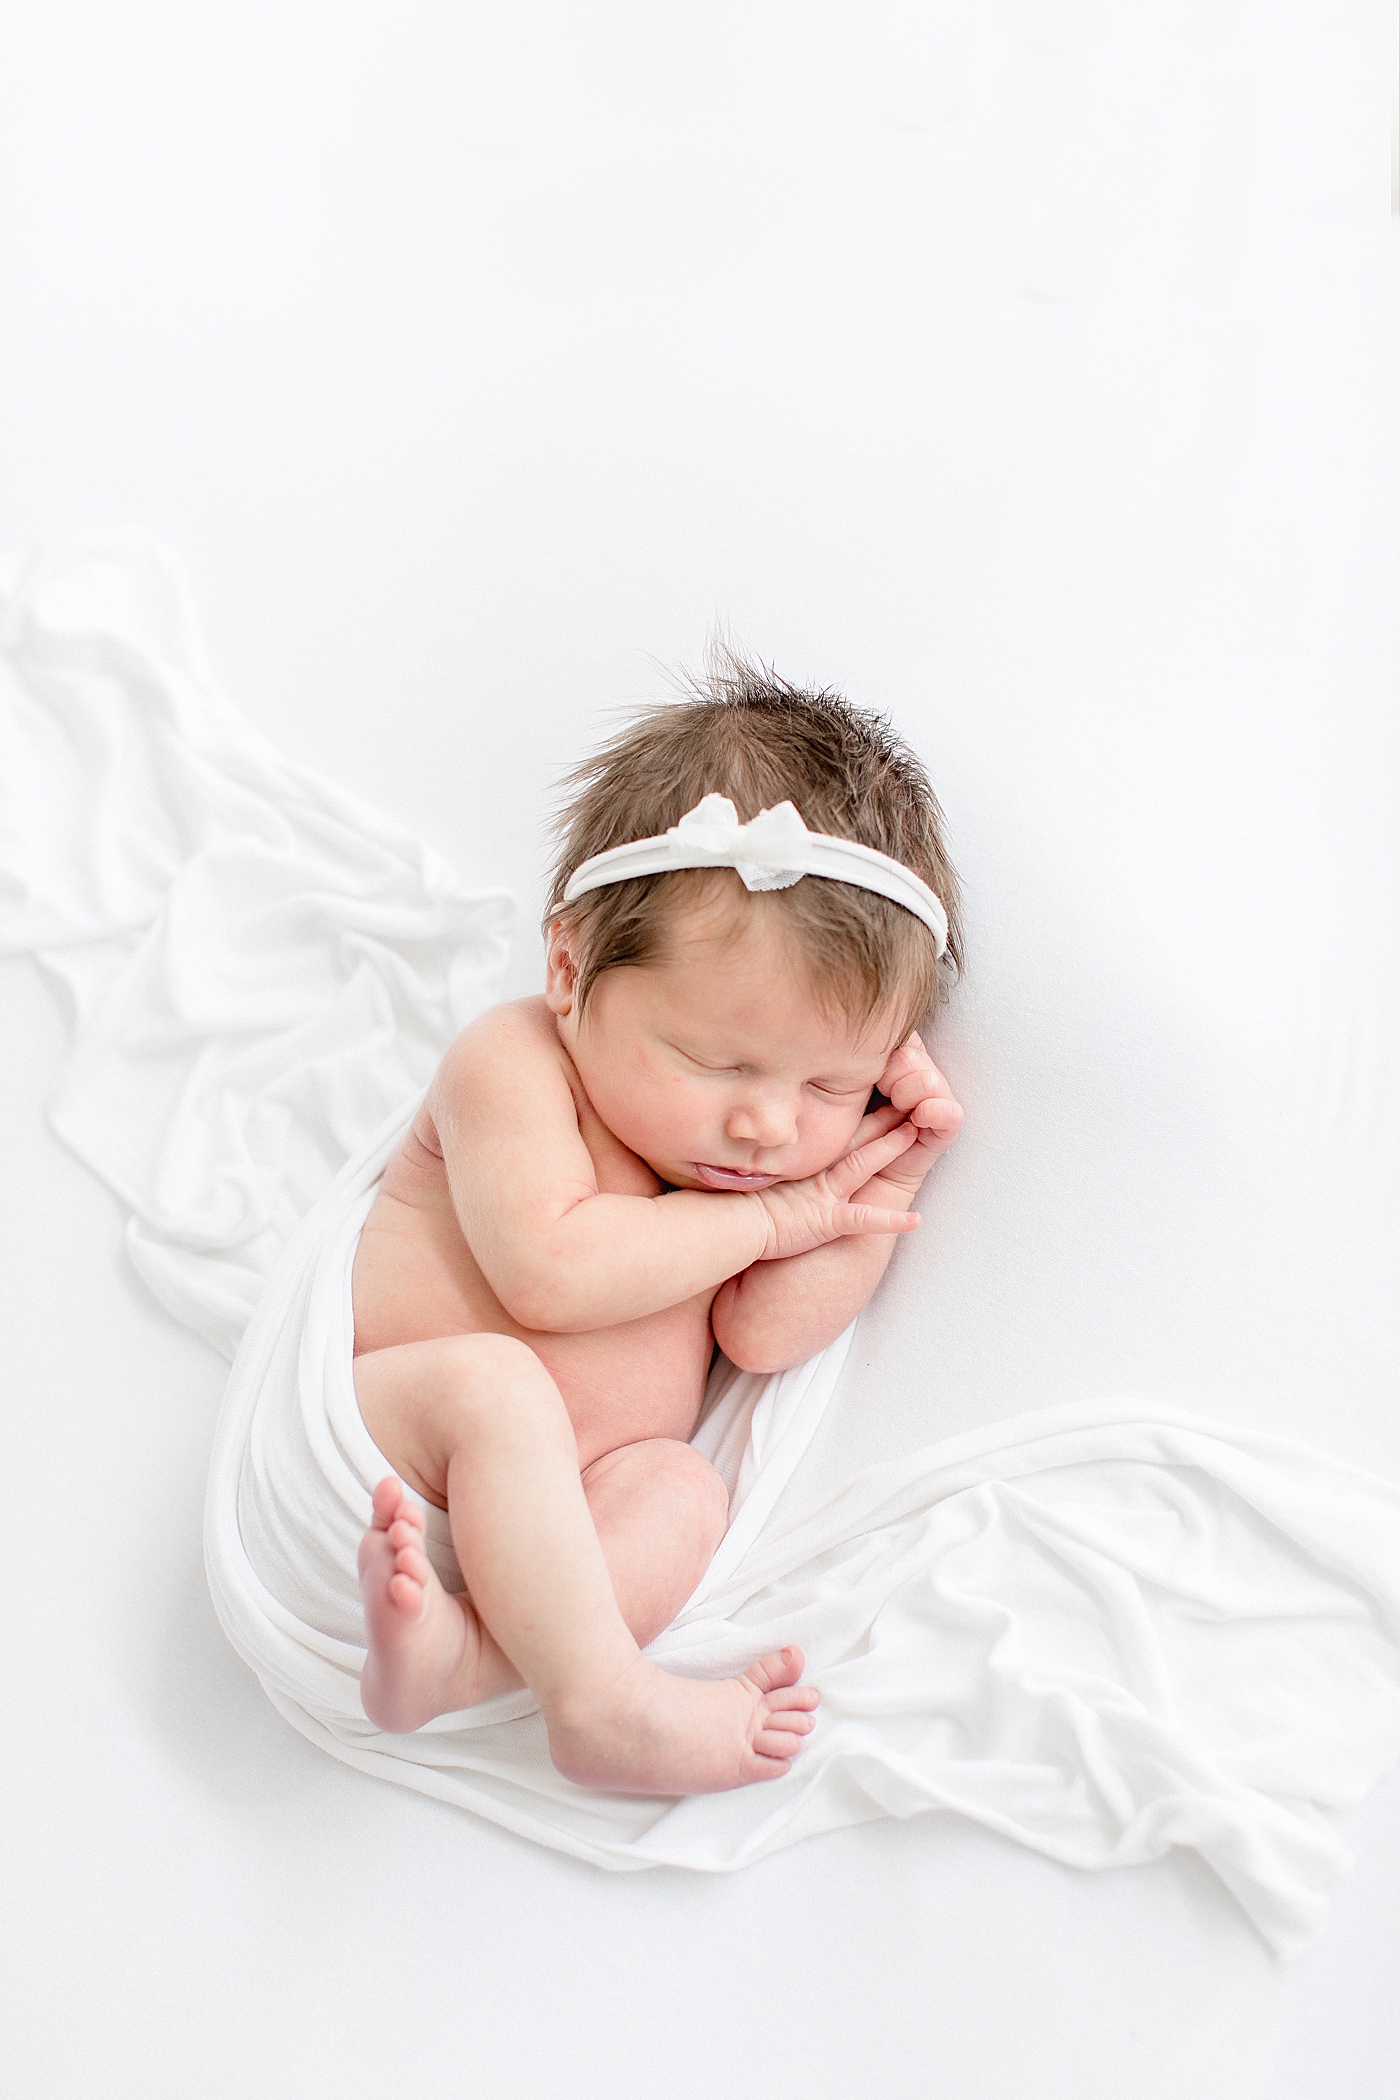 Baby girl newborn session in studio in Tampa, Fl. Photo by Brittany Elise Photography.